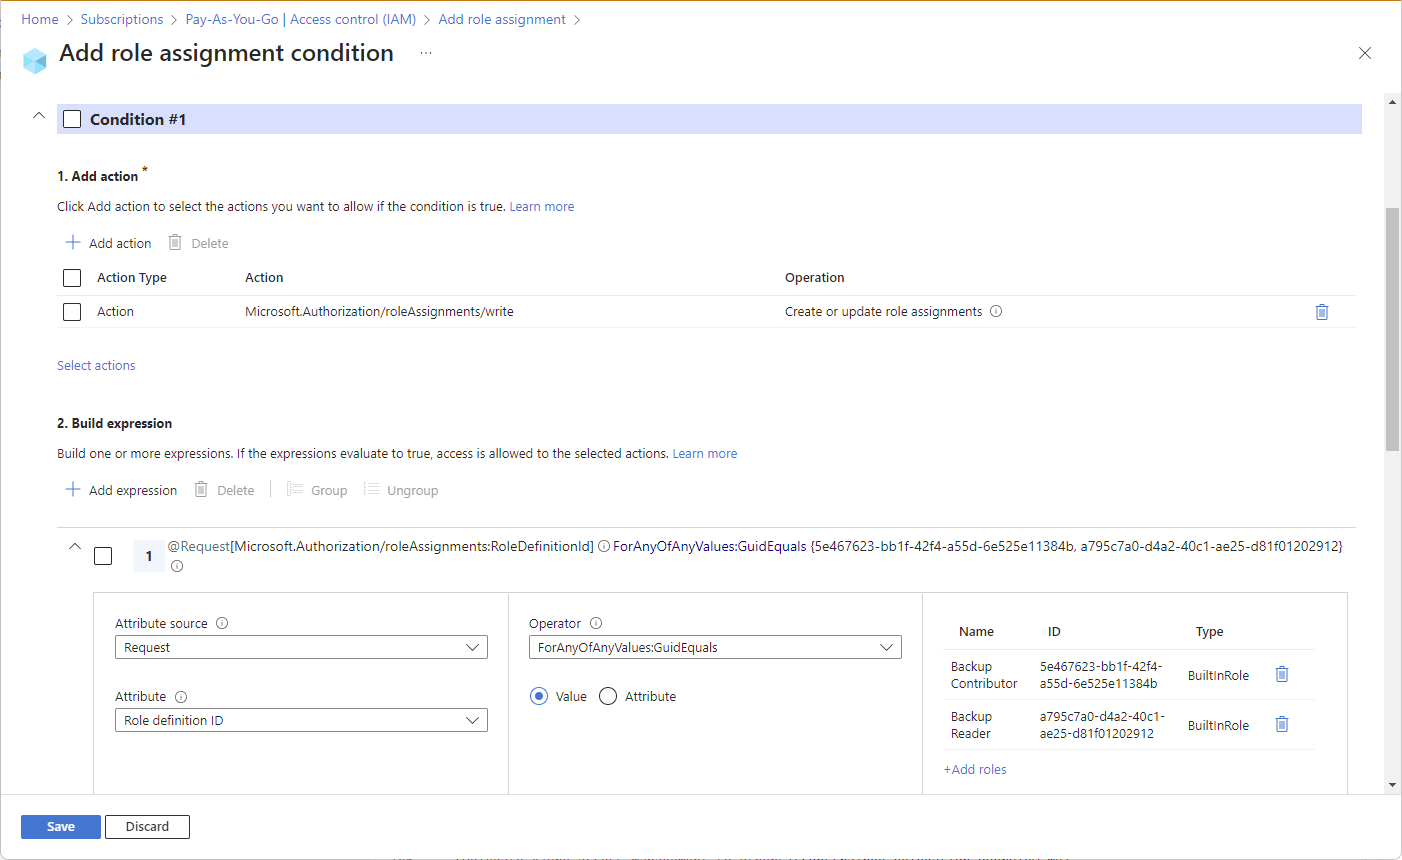 Screenshot of Build expression section to delegate role assignment management with conditions.